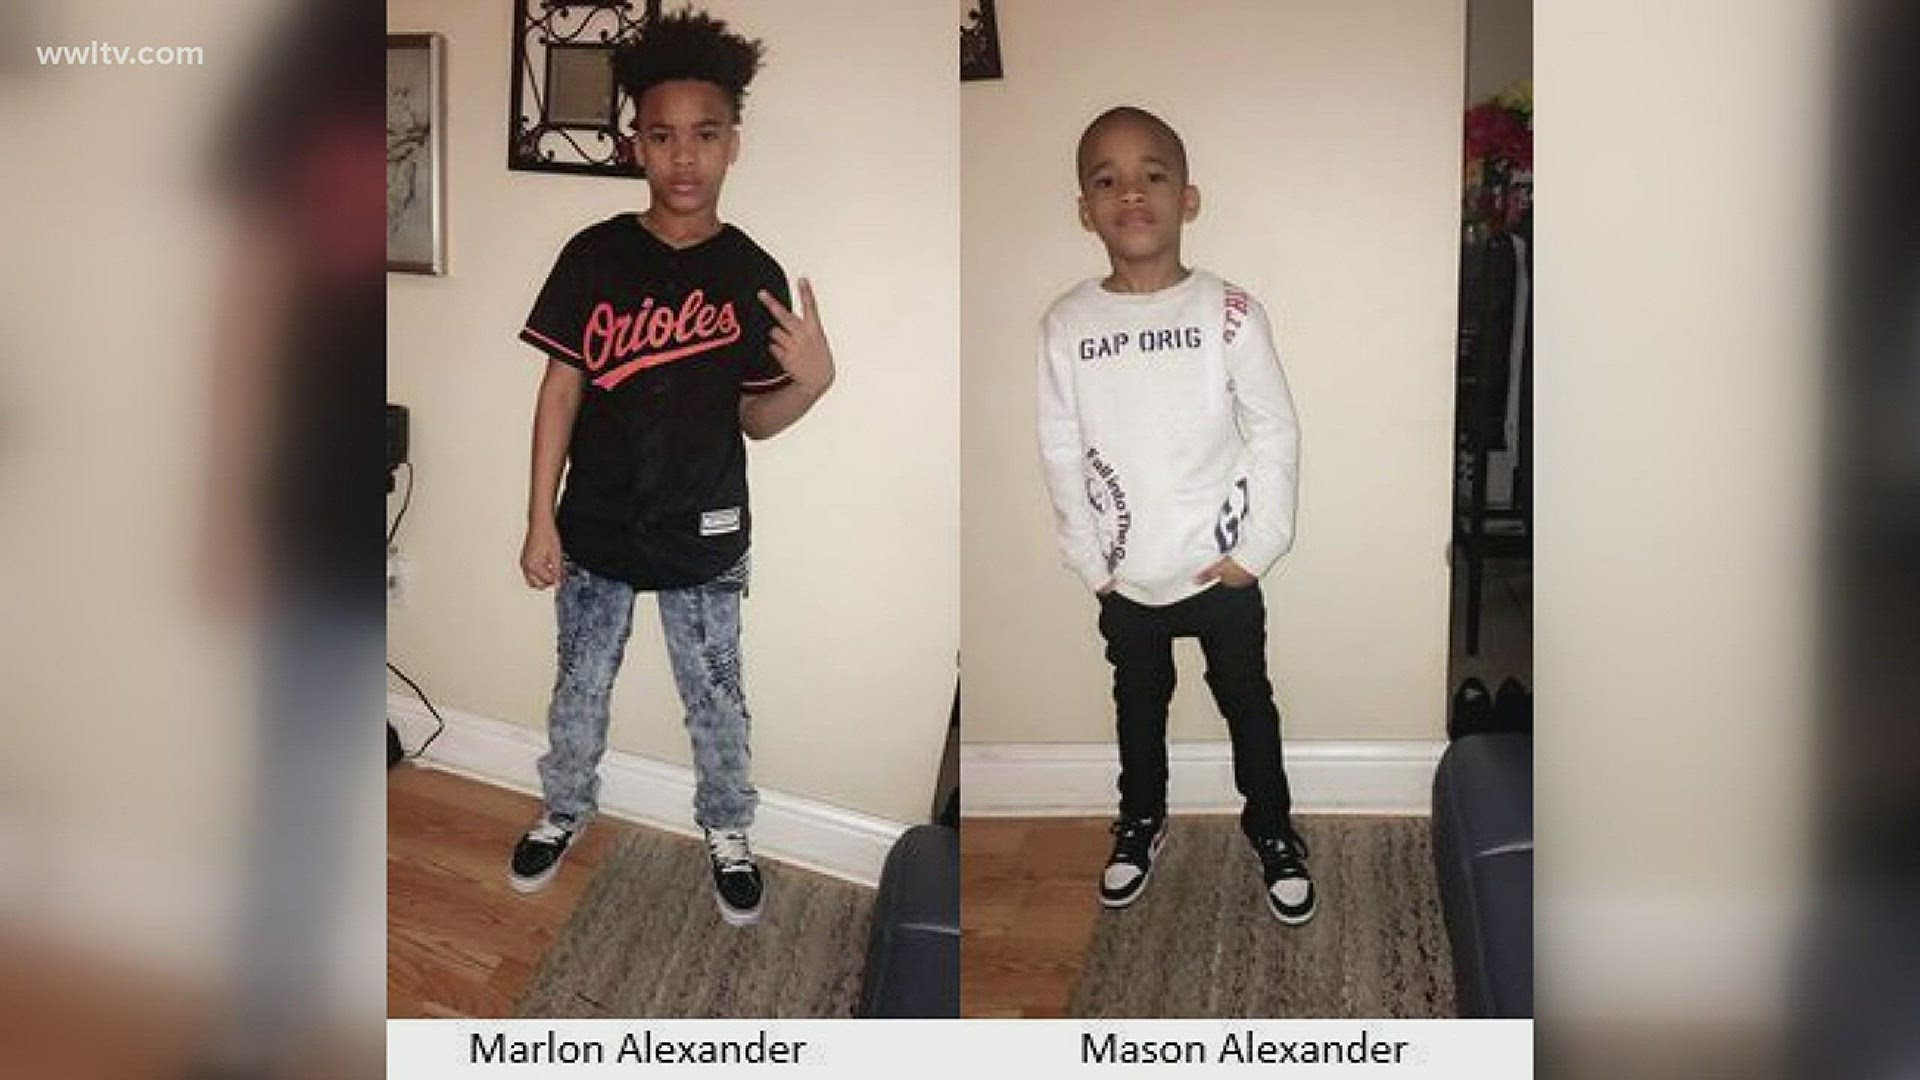 Two brothers - ages 9 and 5 - are reported as missing by the NOPD after they were last seen being dropped off at a residence in Gentilly Friday morning.